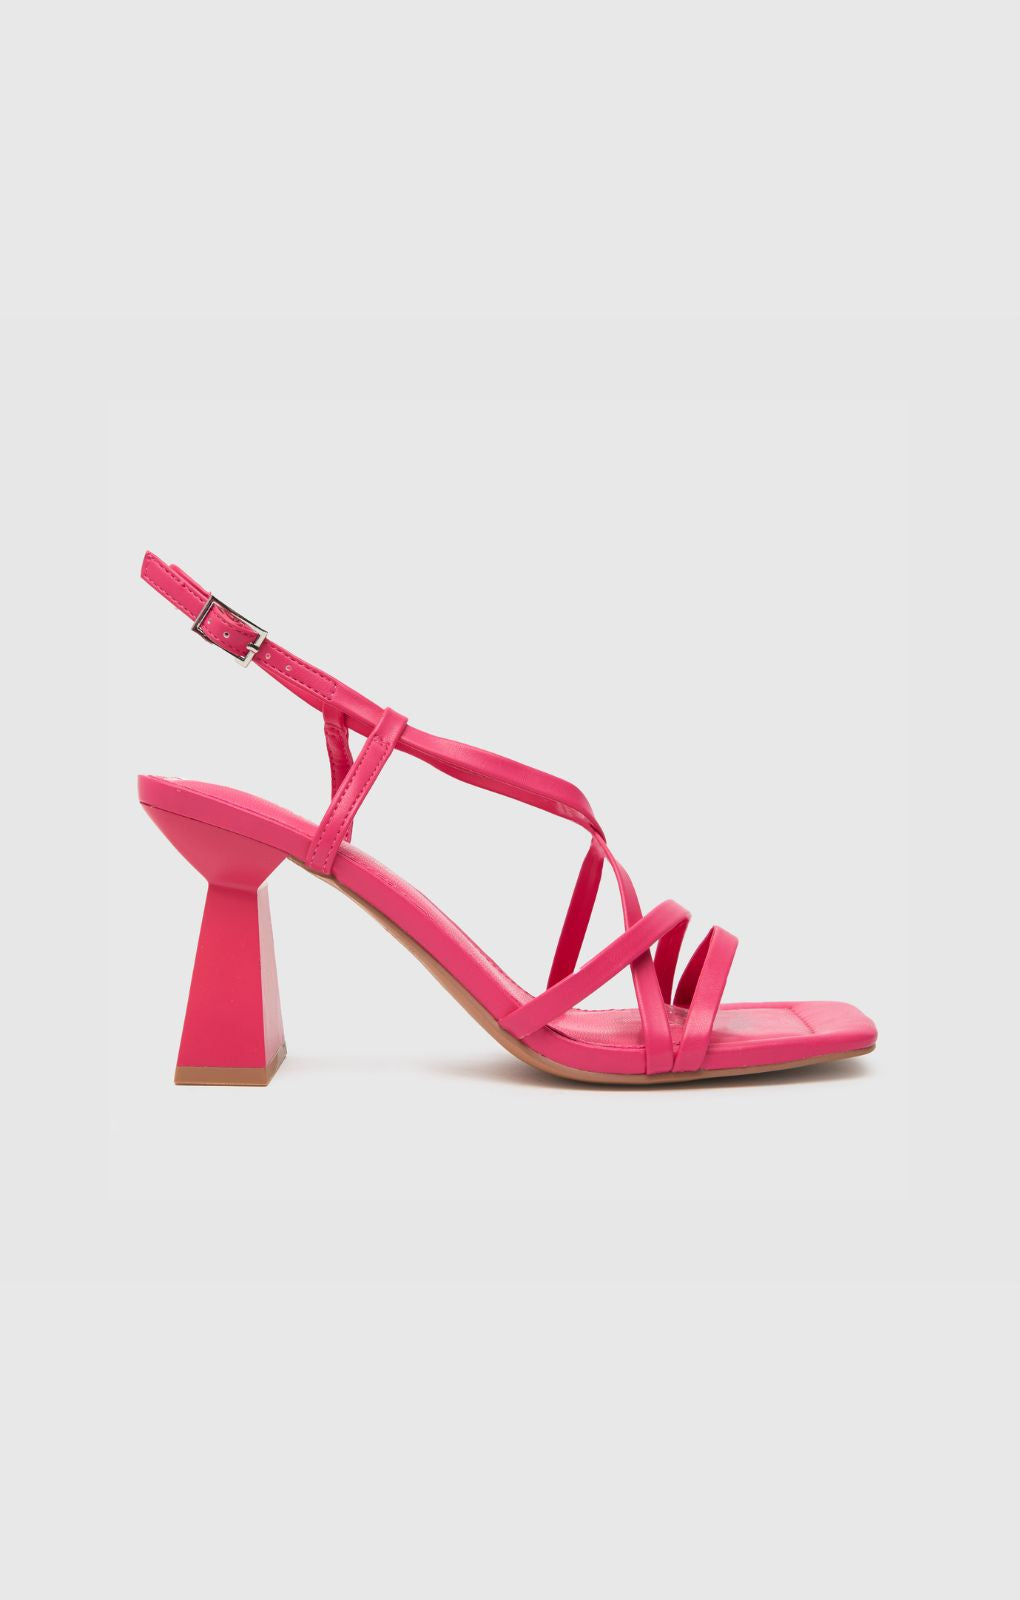 Schuh Scarlett Flared Block High Heels in Pink product image